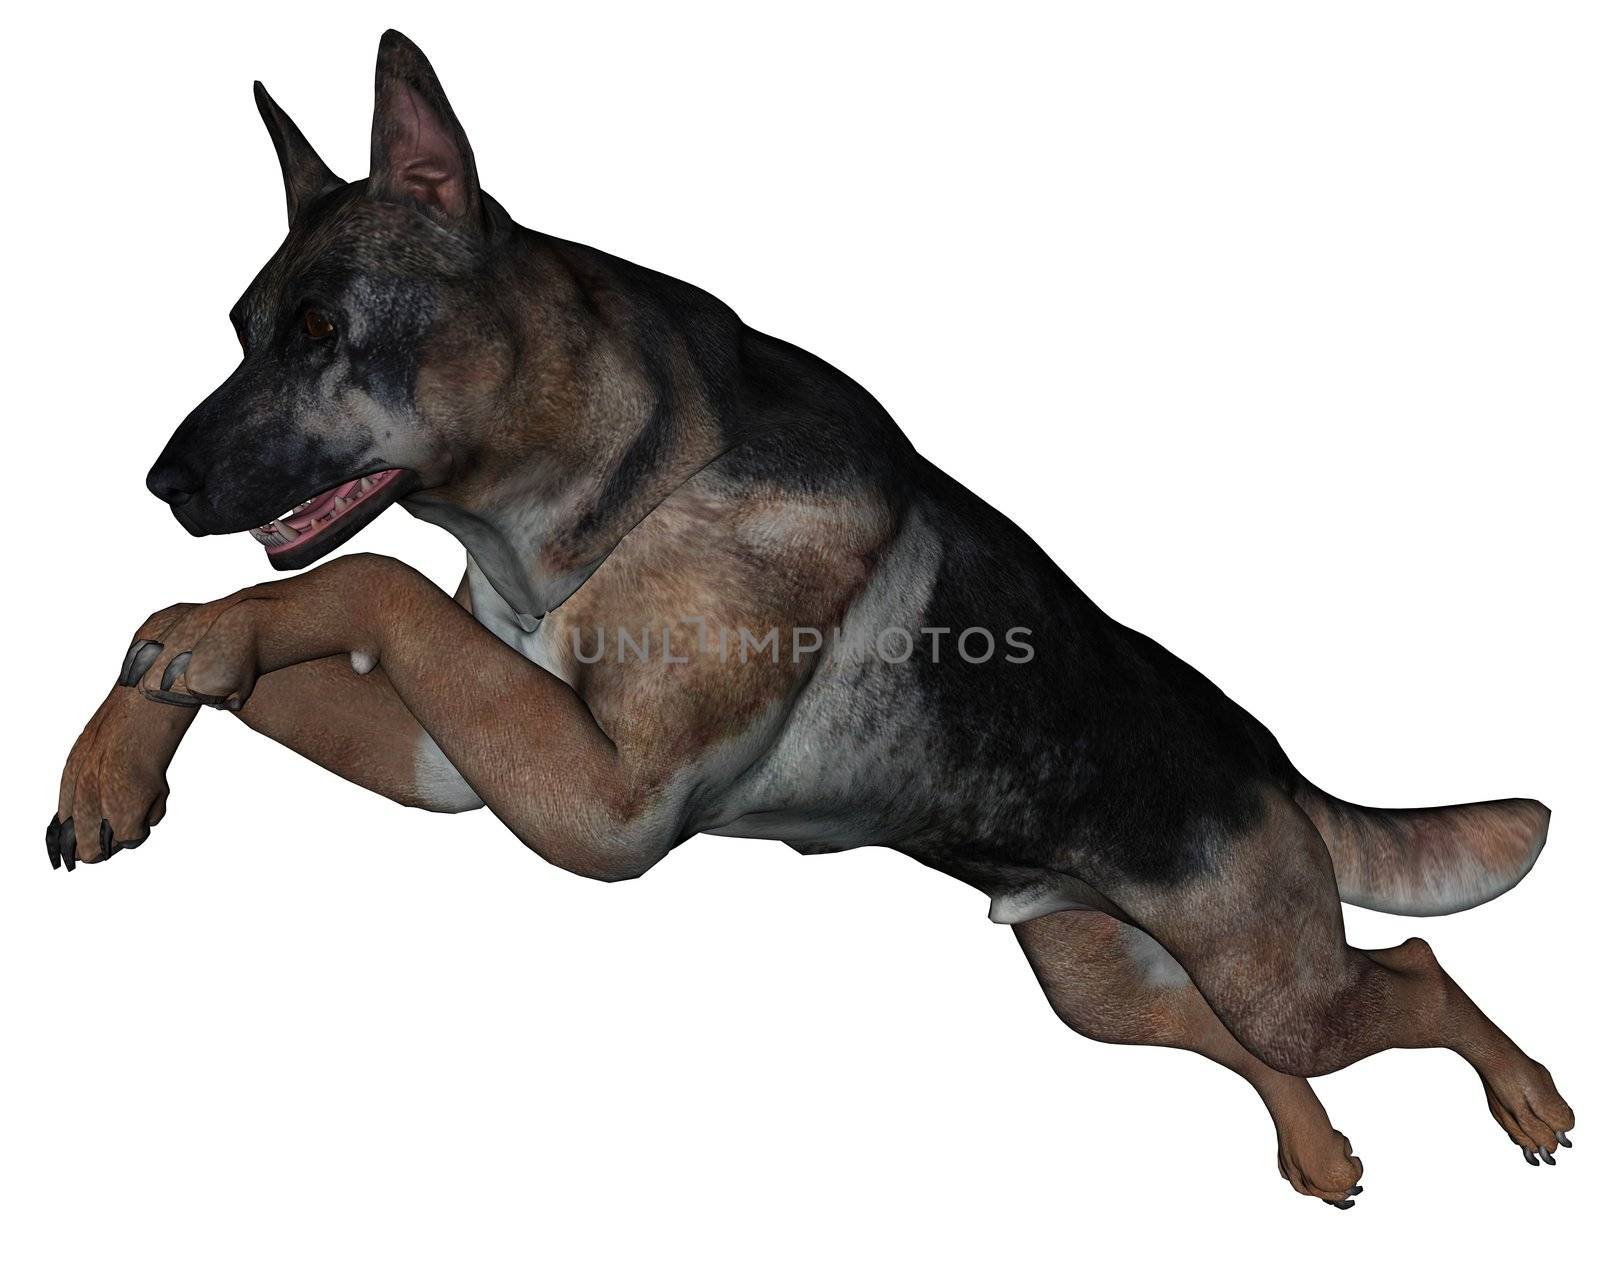 3D rendered German shepherd dog on white background isolated